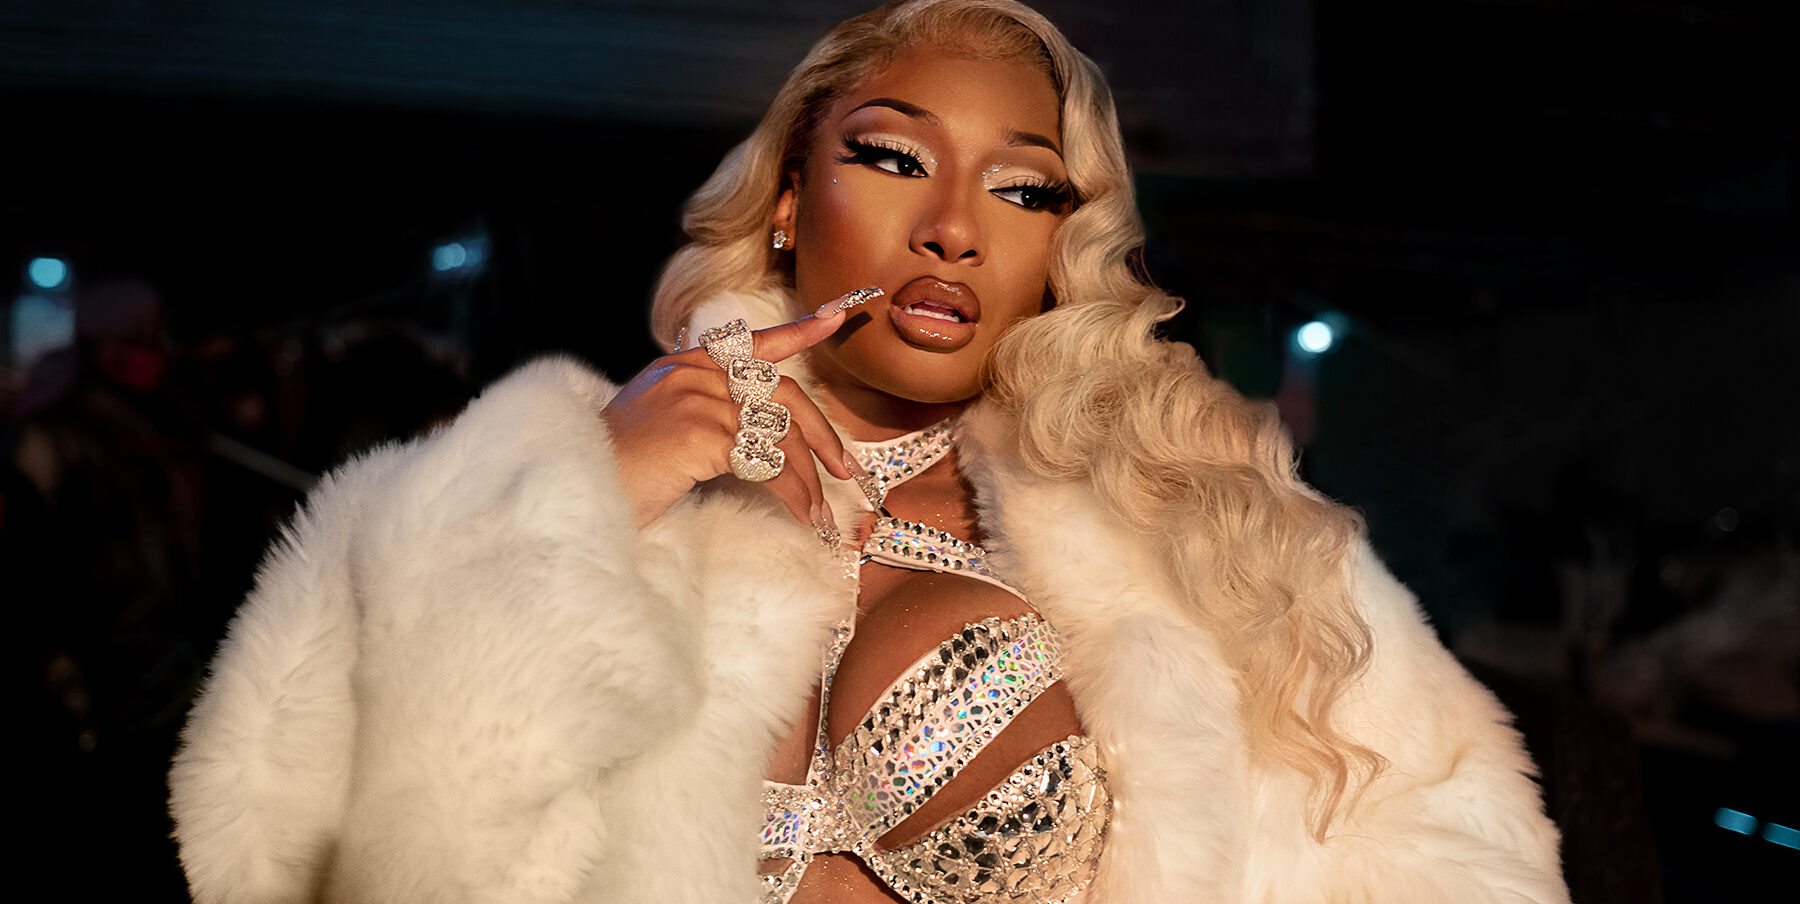 Megan Thee Stallion Will Appear In Season 2 Of ‘P-Valley’